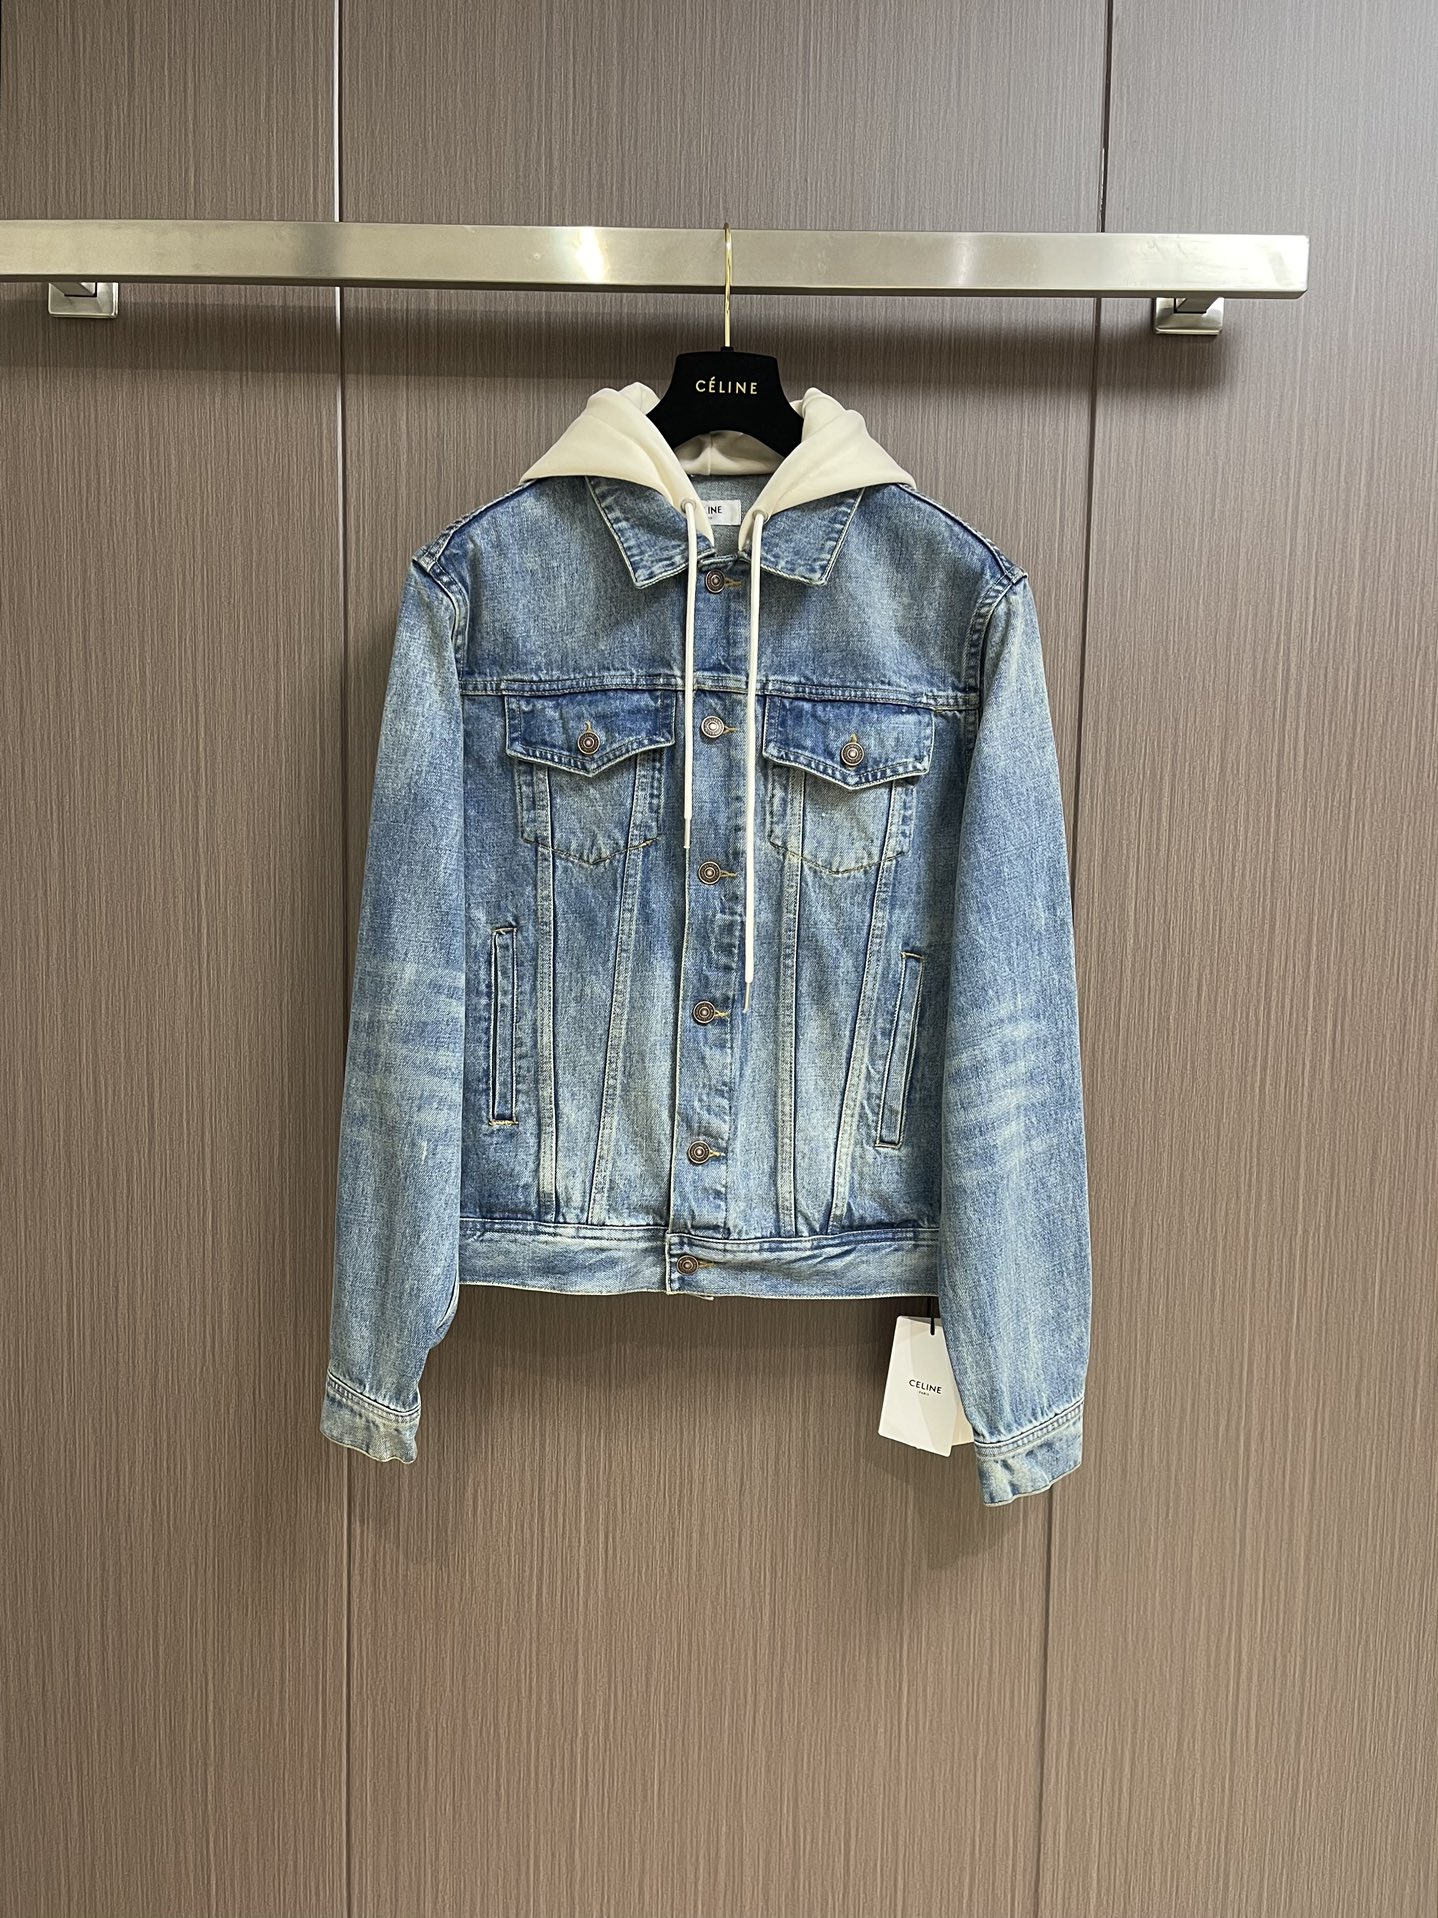 Celine Flawless
 Clothing Coats & Jackets Quality Replica
 Printing Cotton Denim Hooded Top